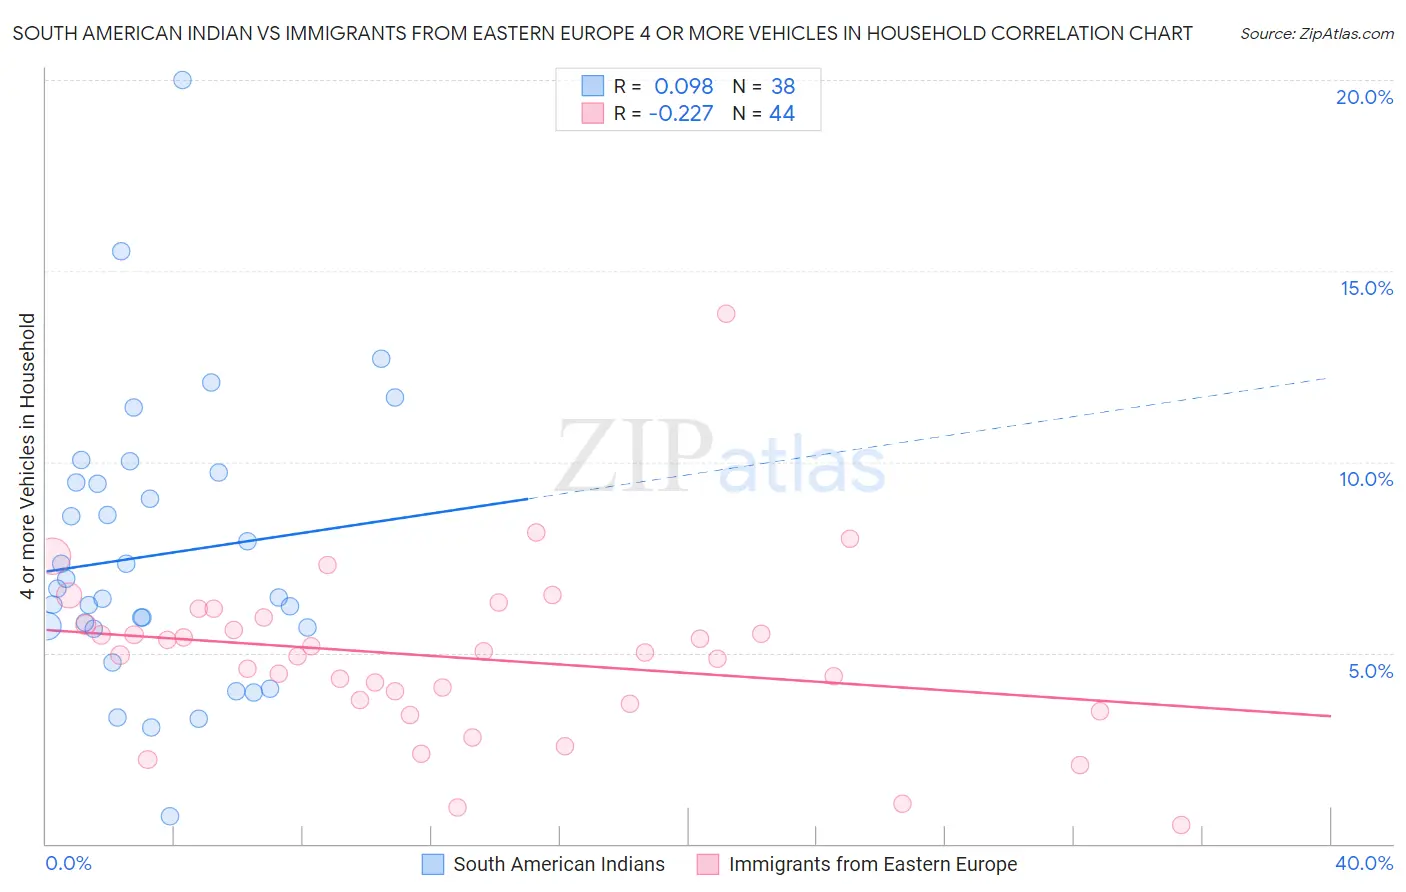 South American Indian vs Immigrants from Eastern Europe 4 or more Vehicles in Household